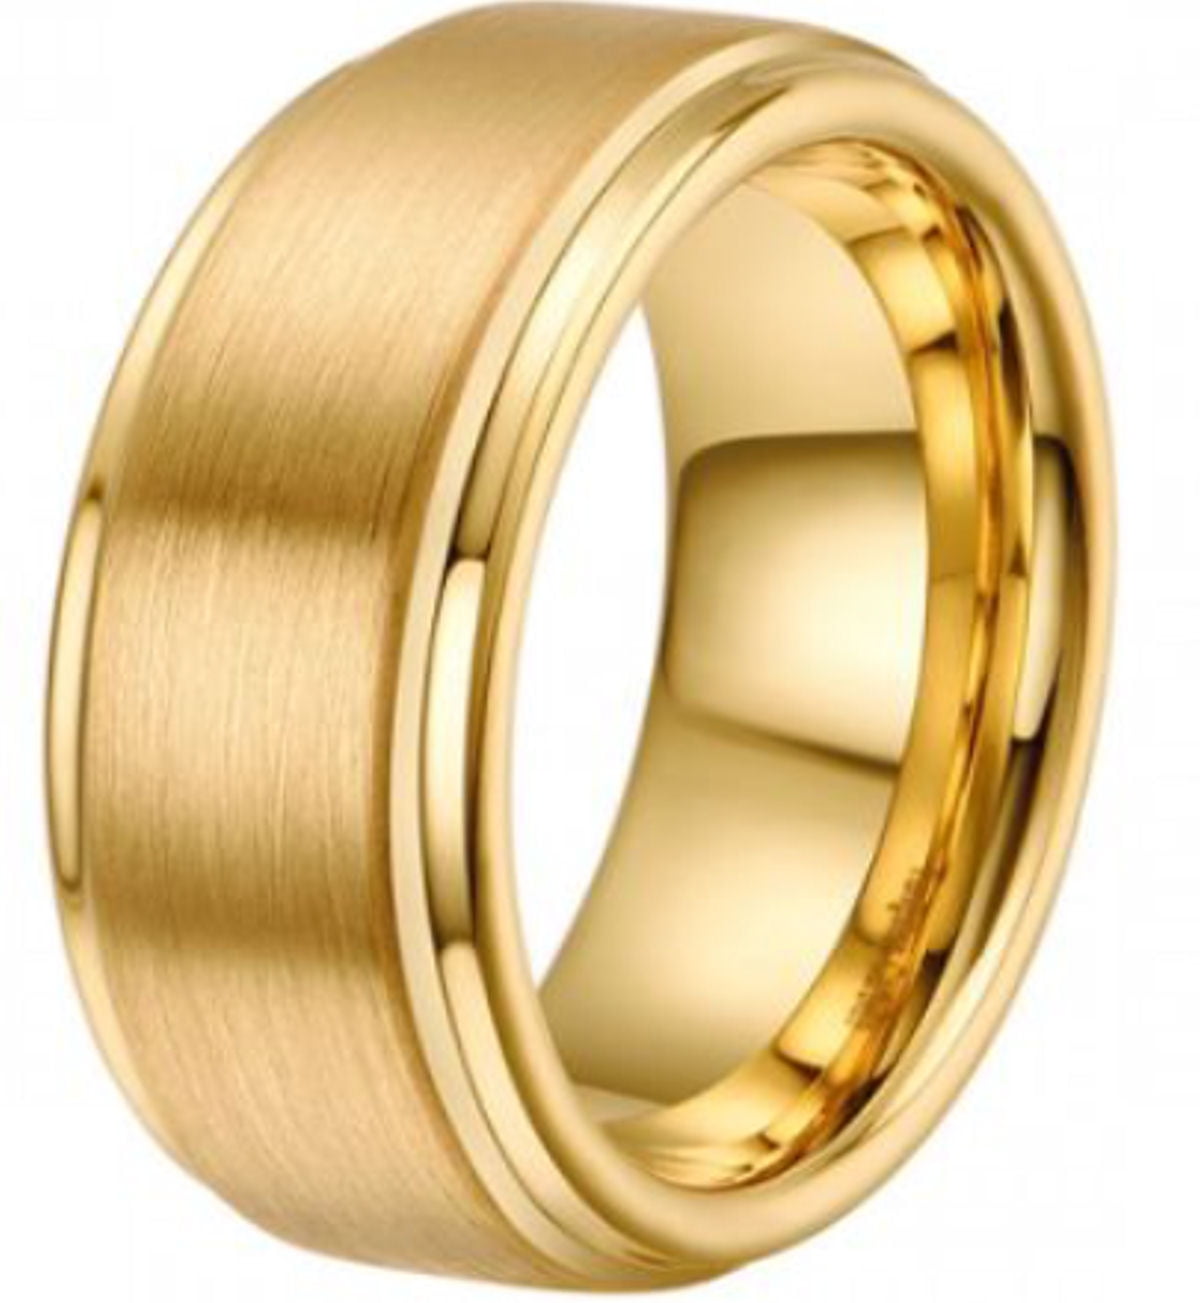 8mm Classic Brushed & Polished Tungsten Carbide Ring 14K Yellow Gold Half Round Comfor Fit Wedding Band